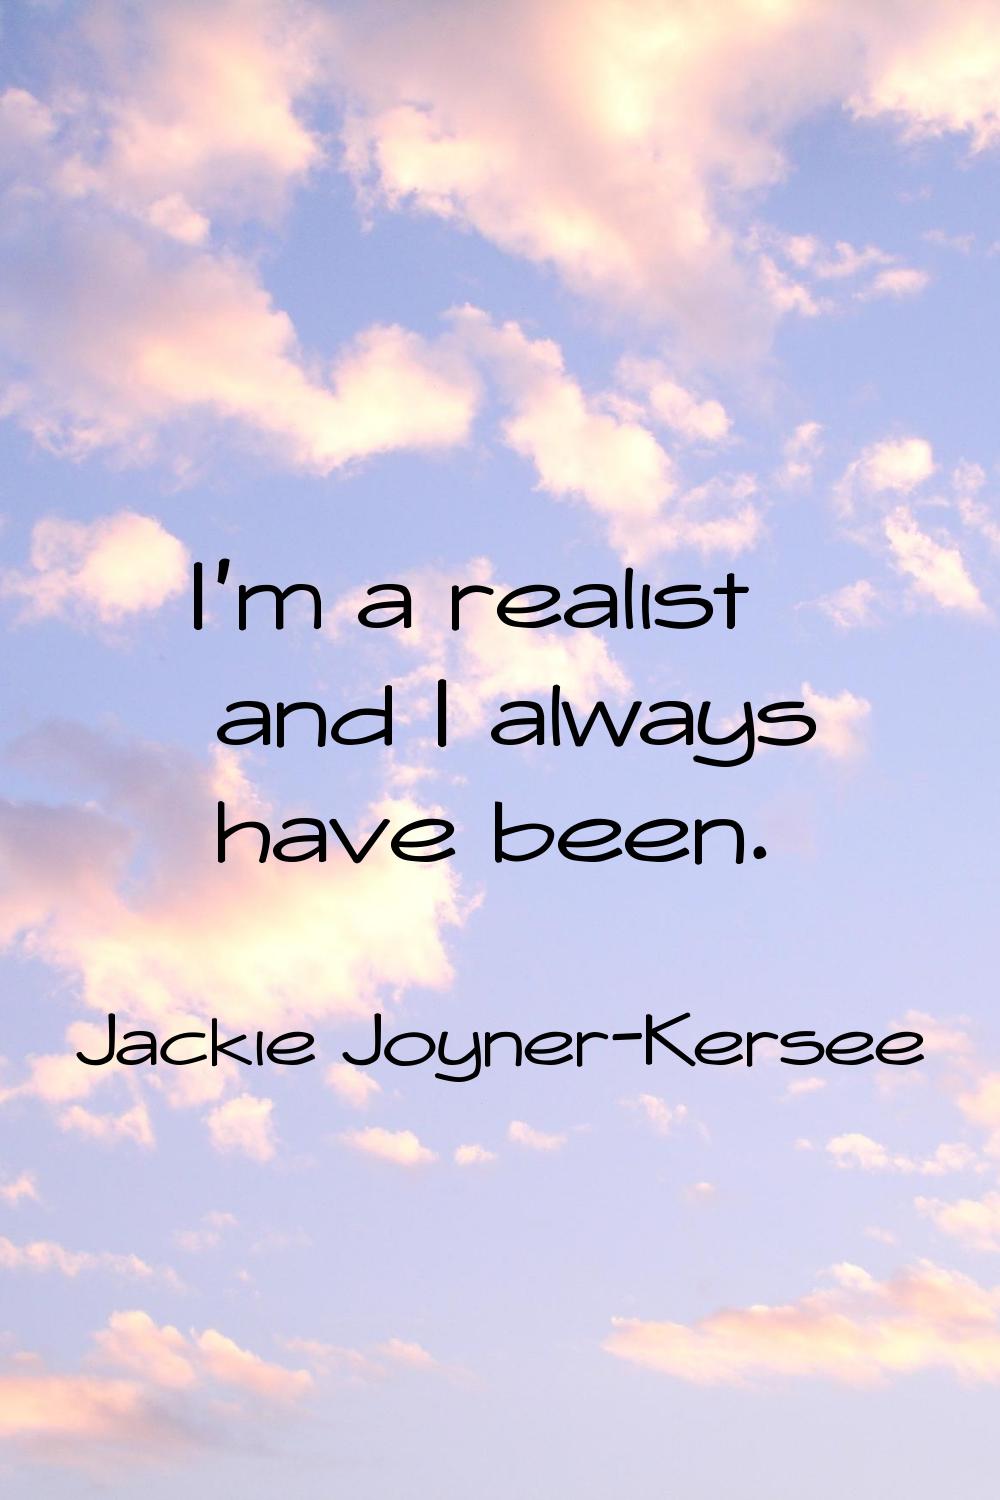 I'm a realist and I always have been.